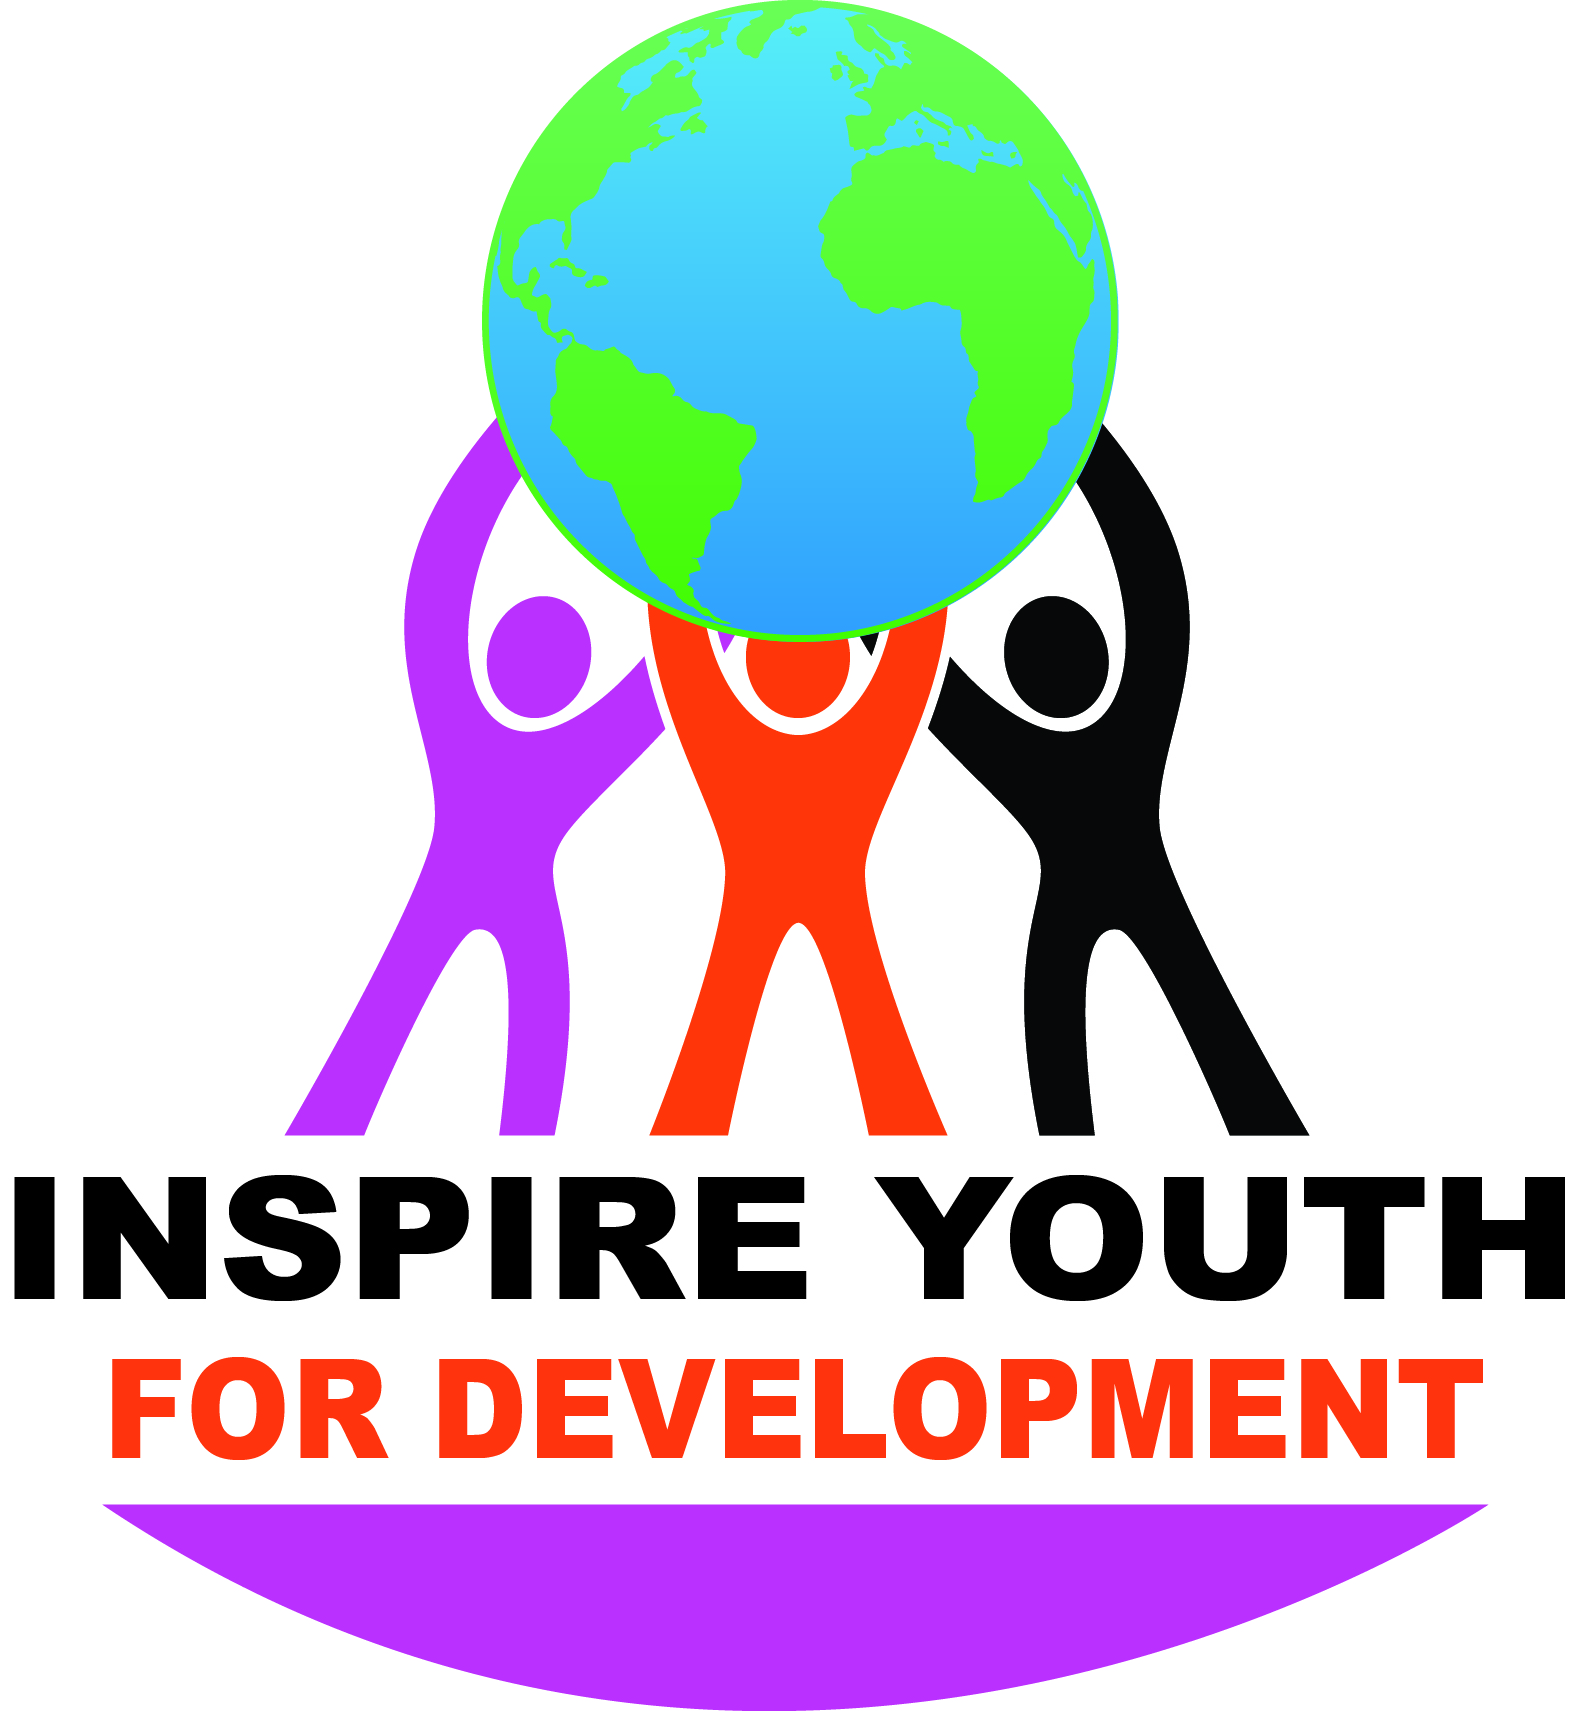 inspire youth